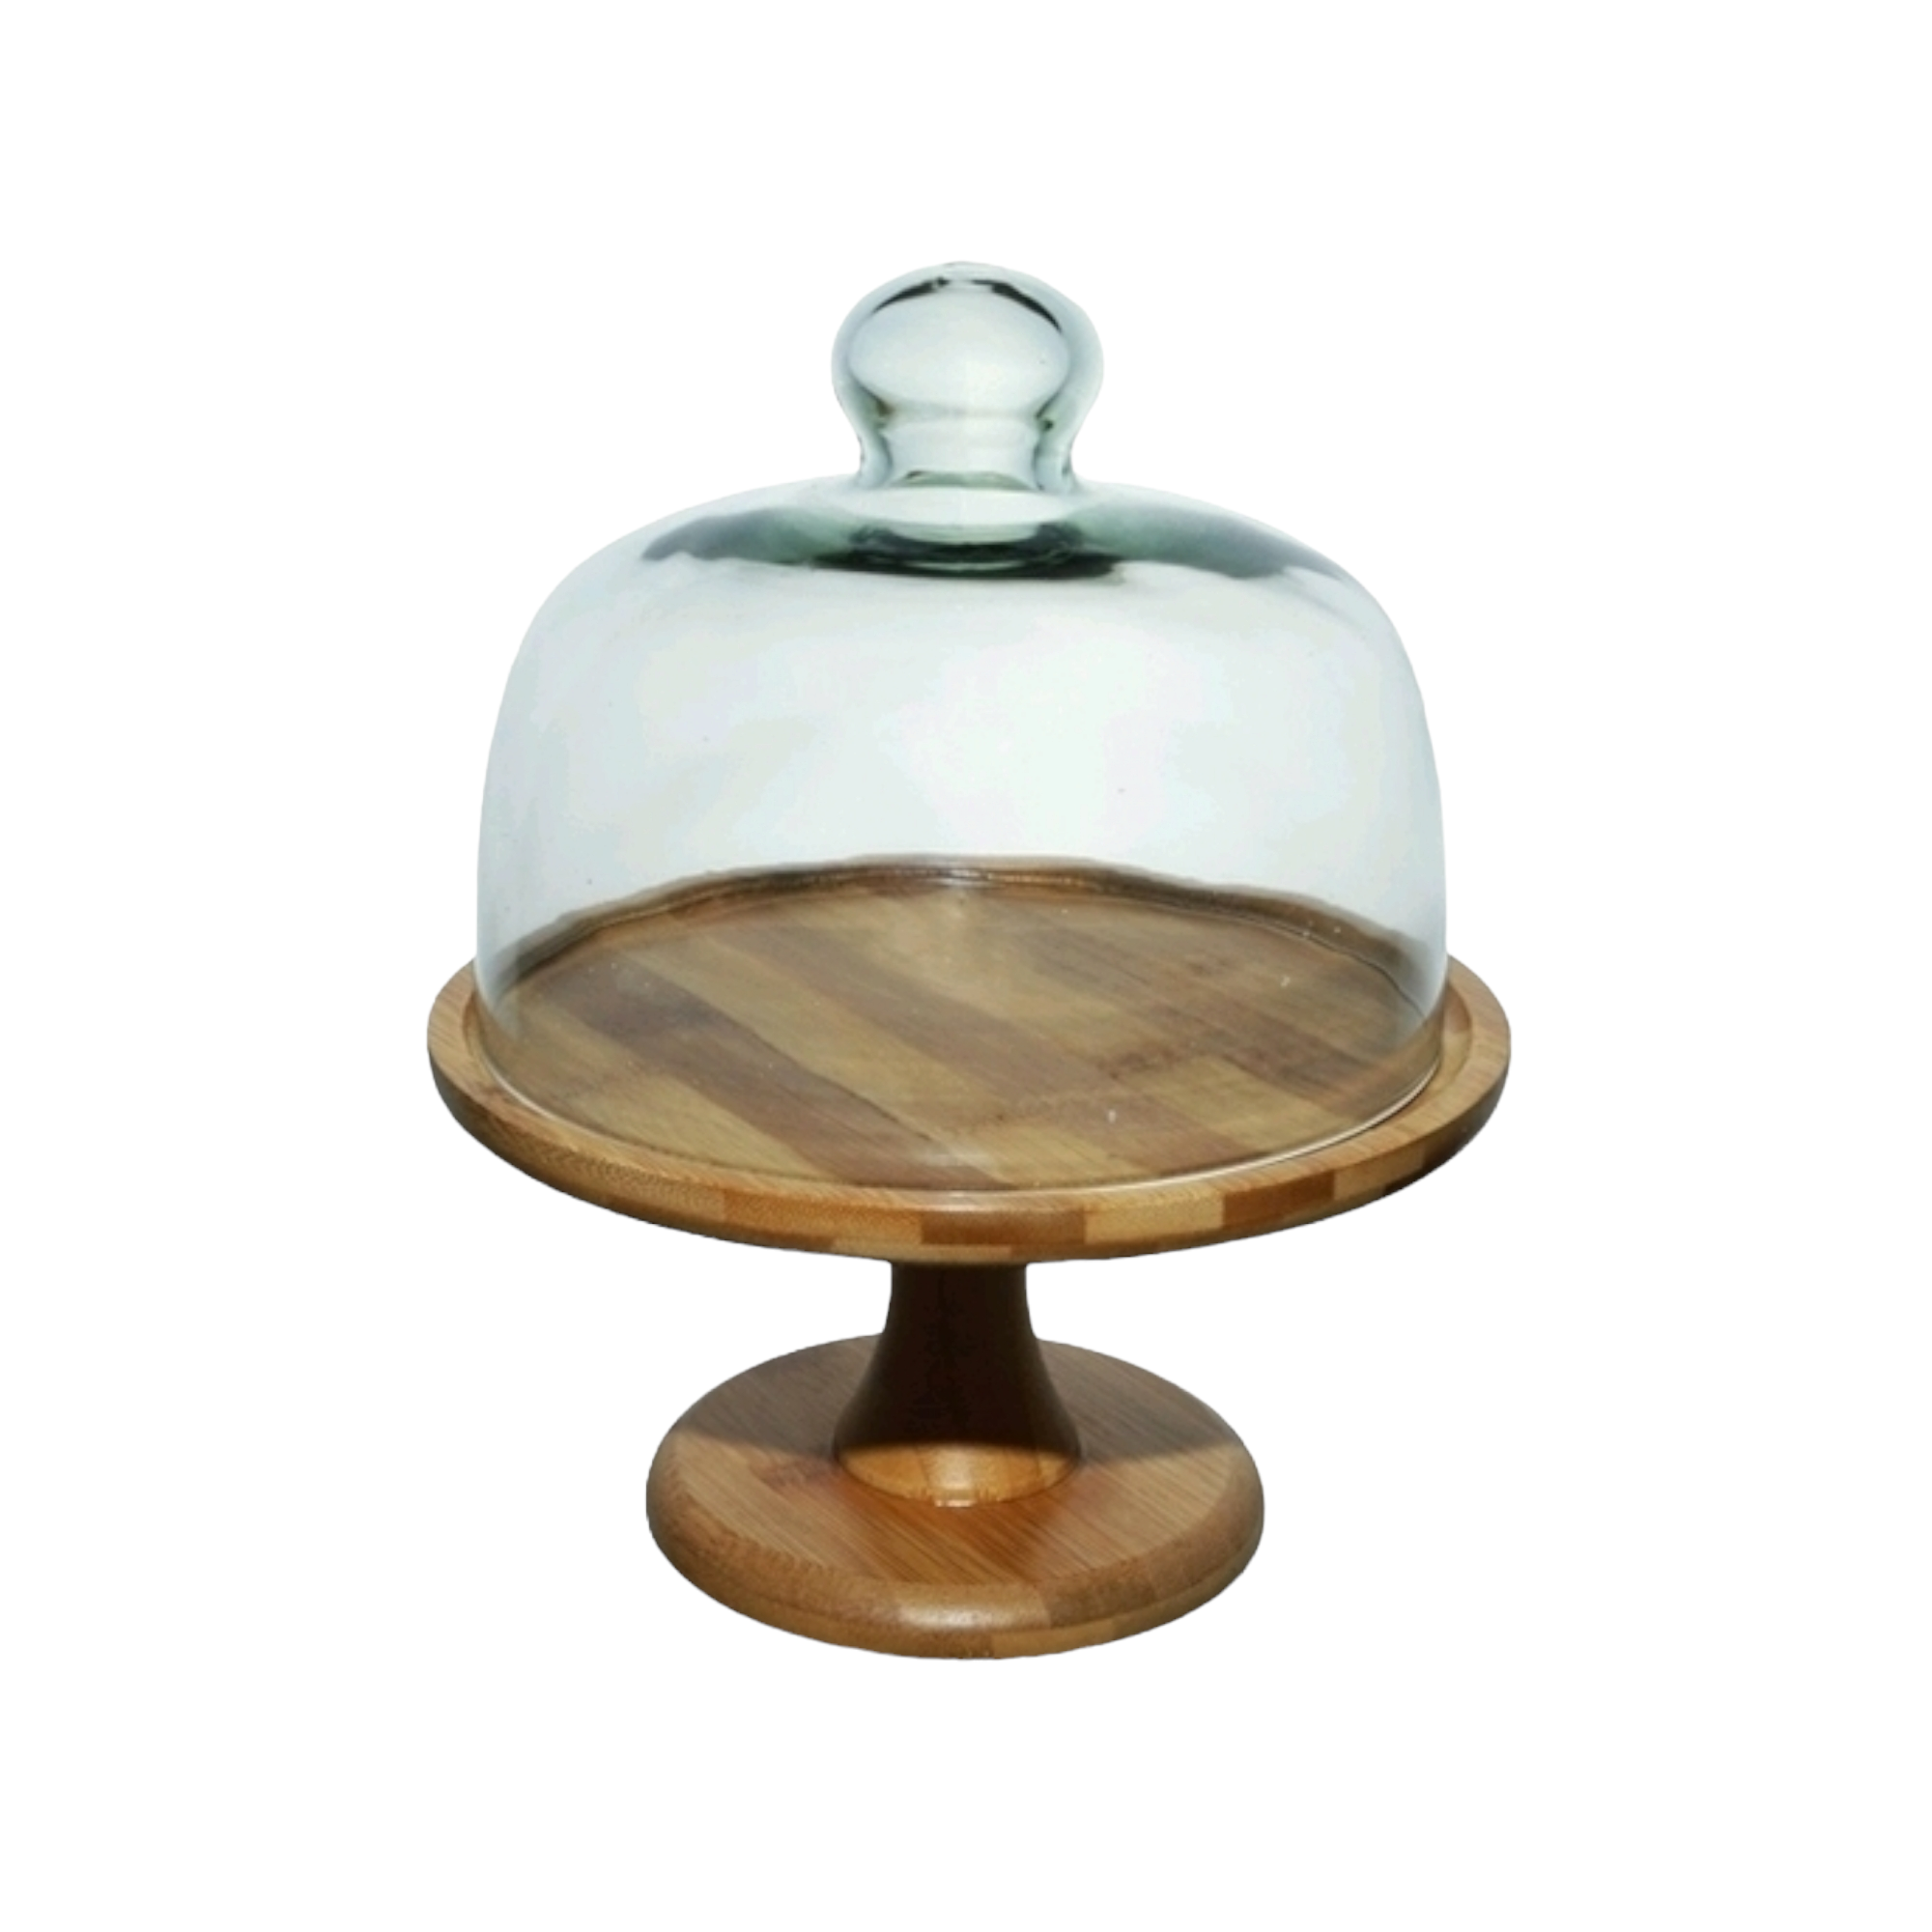 Patisserie Cake Dome Server 24cm Acacia Wooden Base Footed Stand 34554